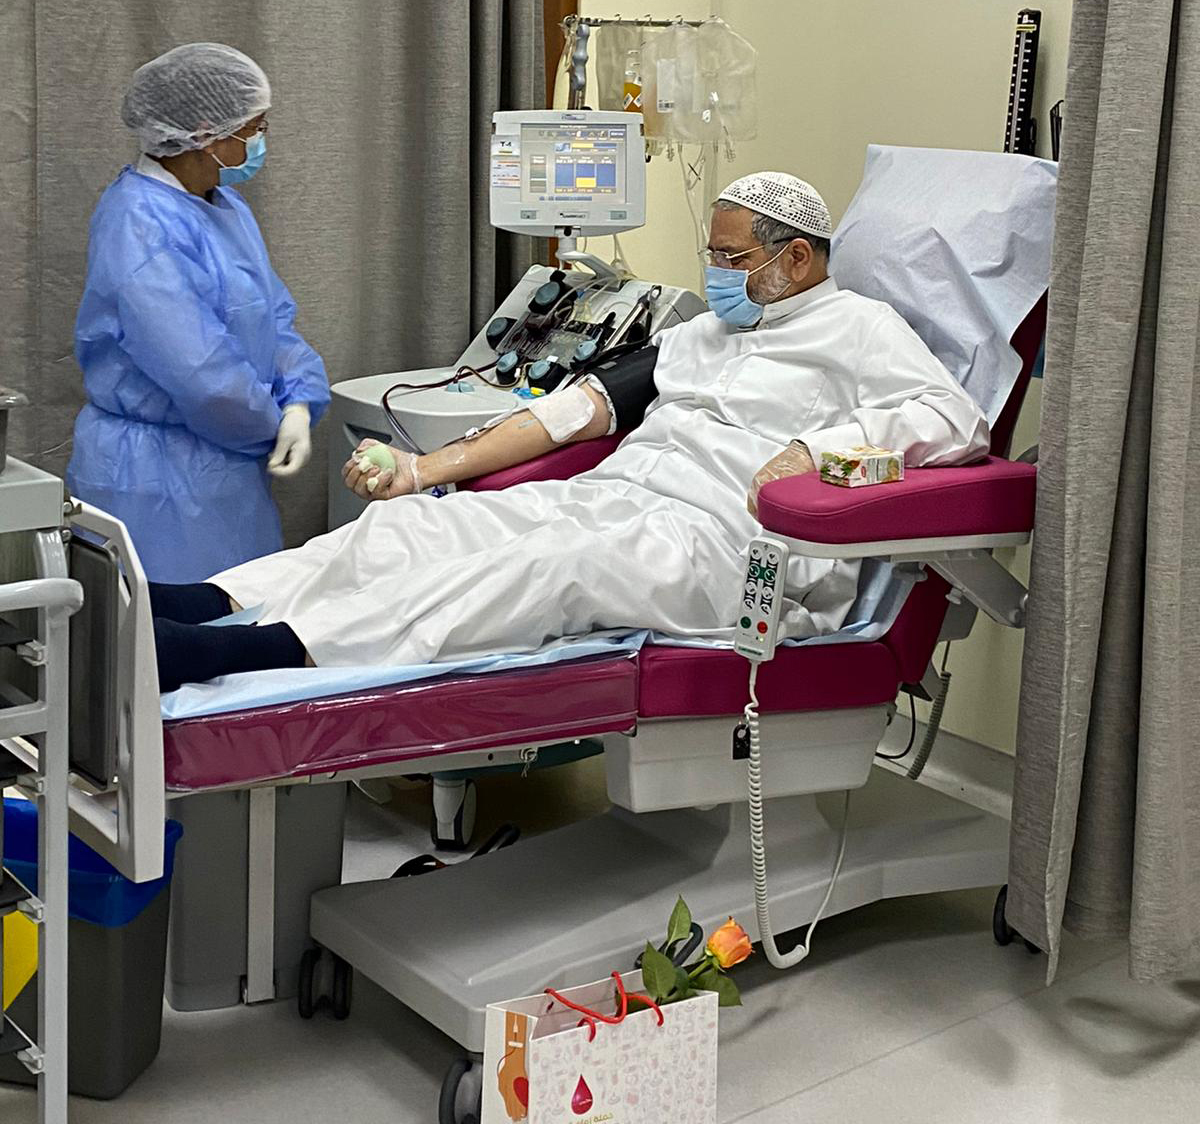 Kuwait blood bank produces artificial plasma to combat Covid-19